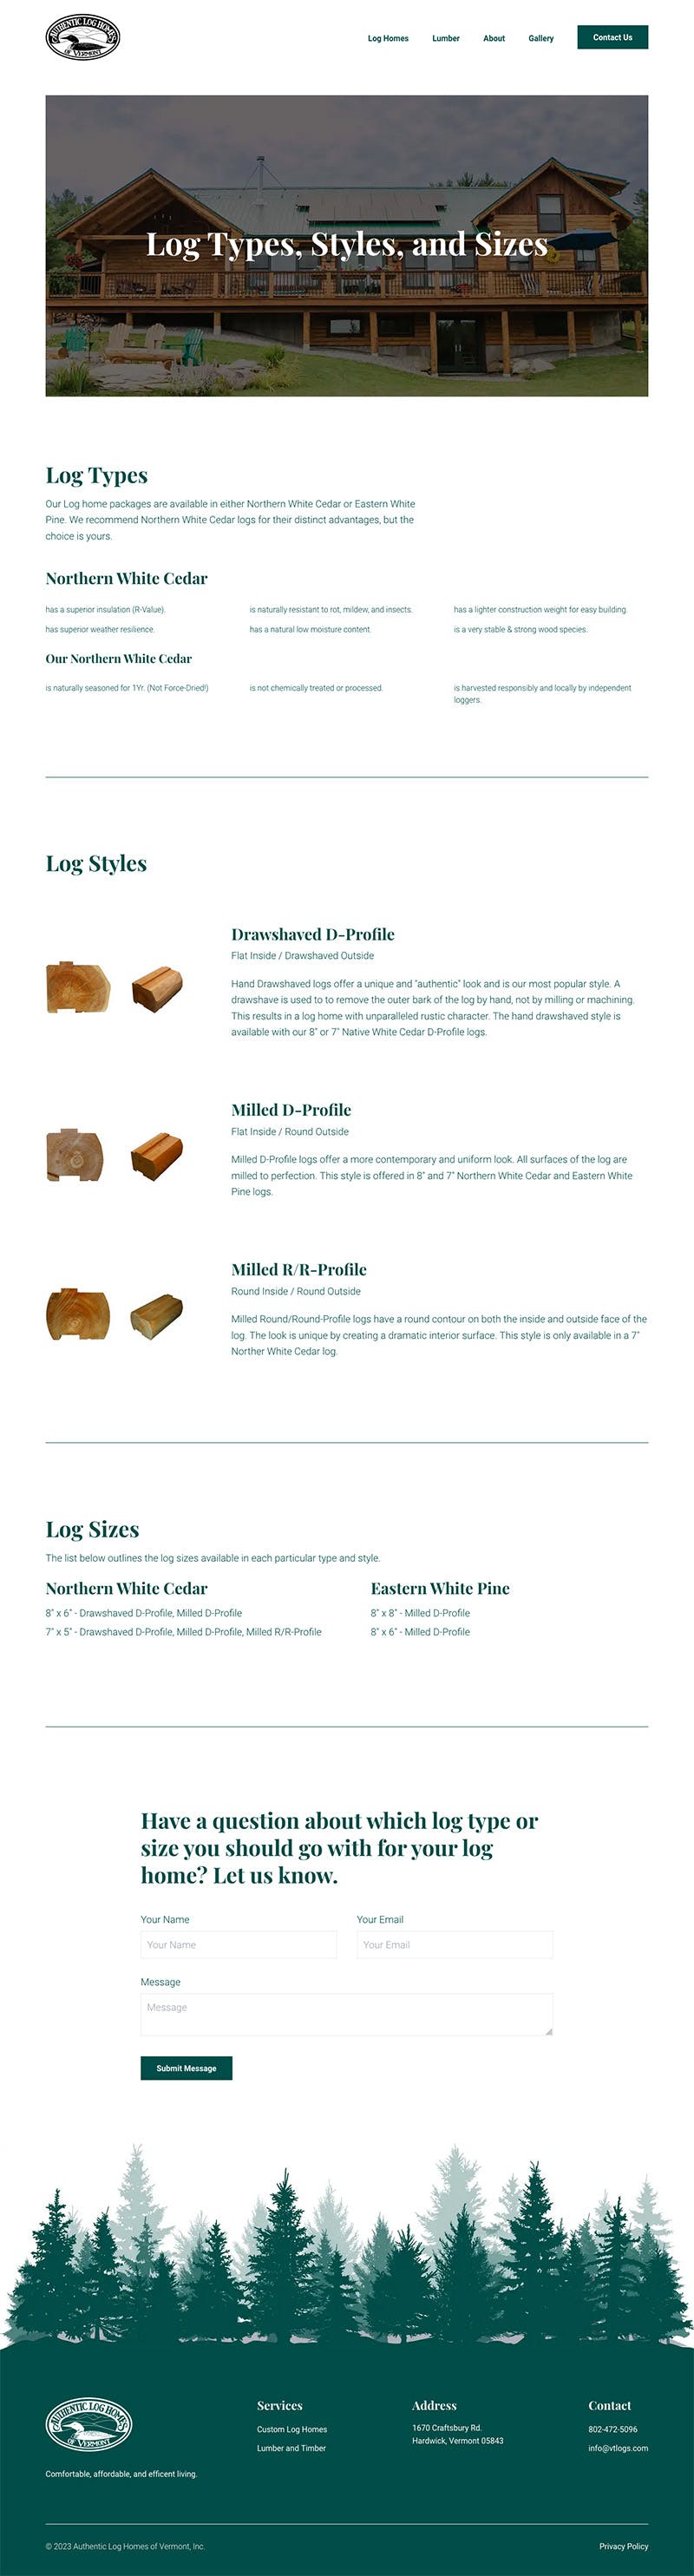 mockup next generation web design for Authentic Log Homes of Vermont